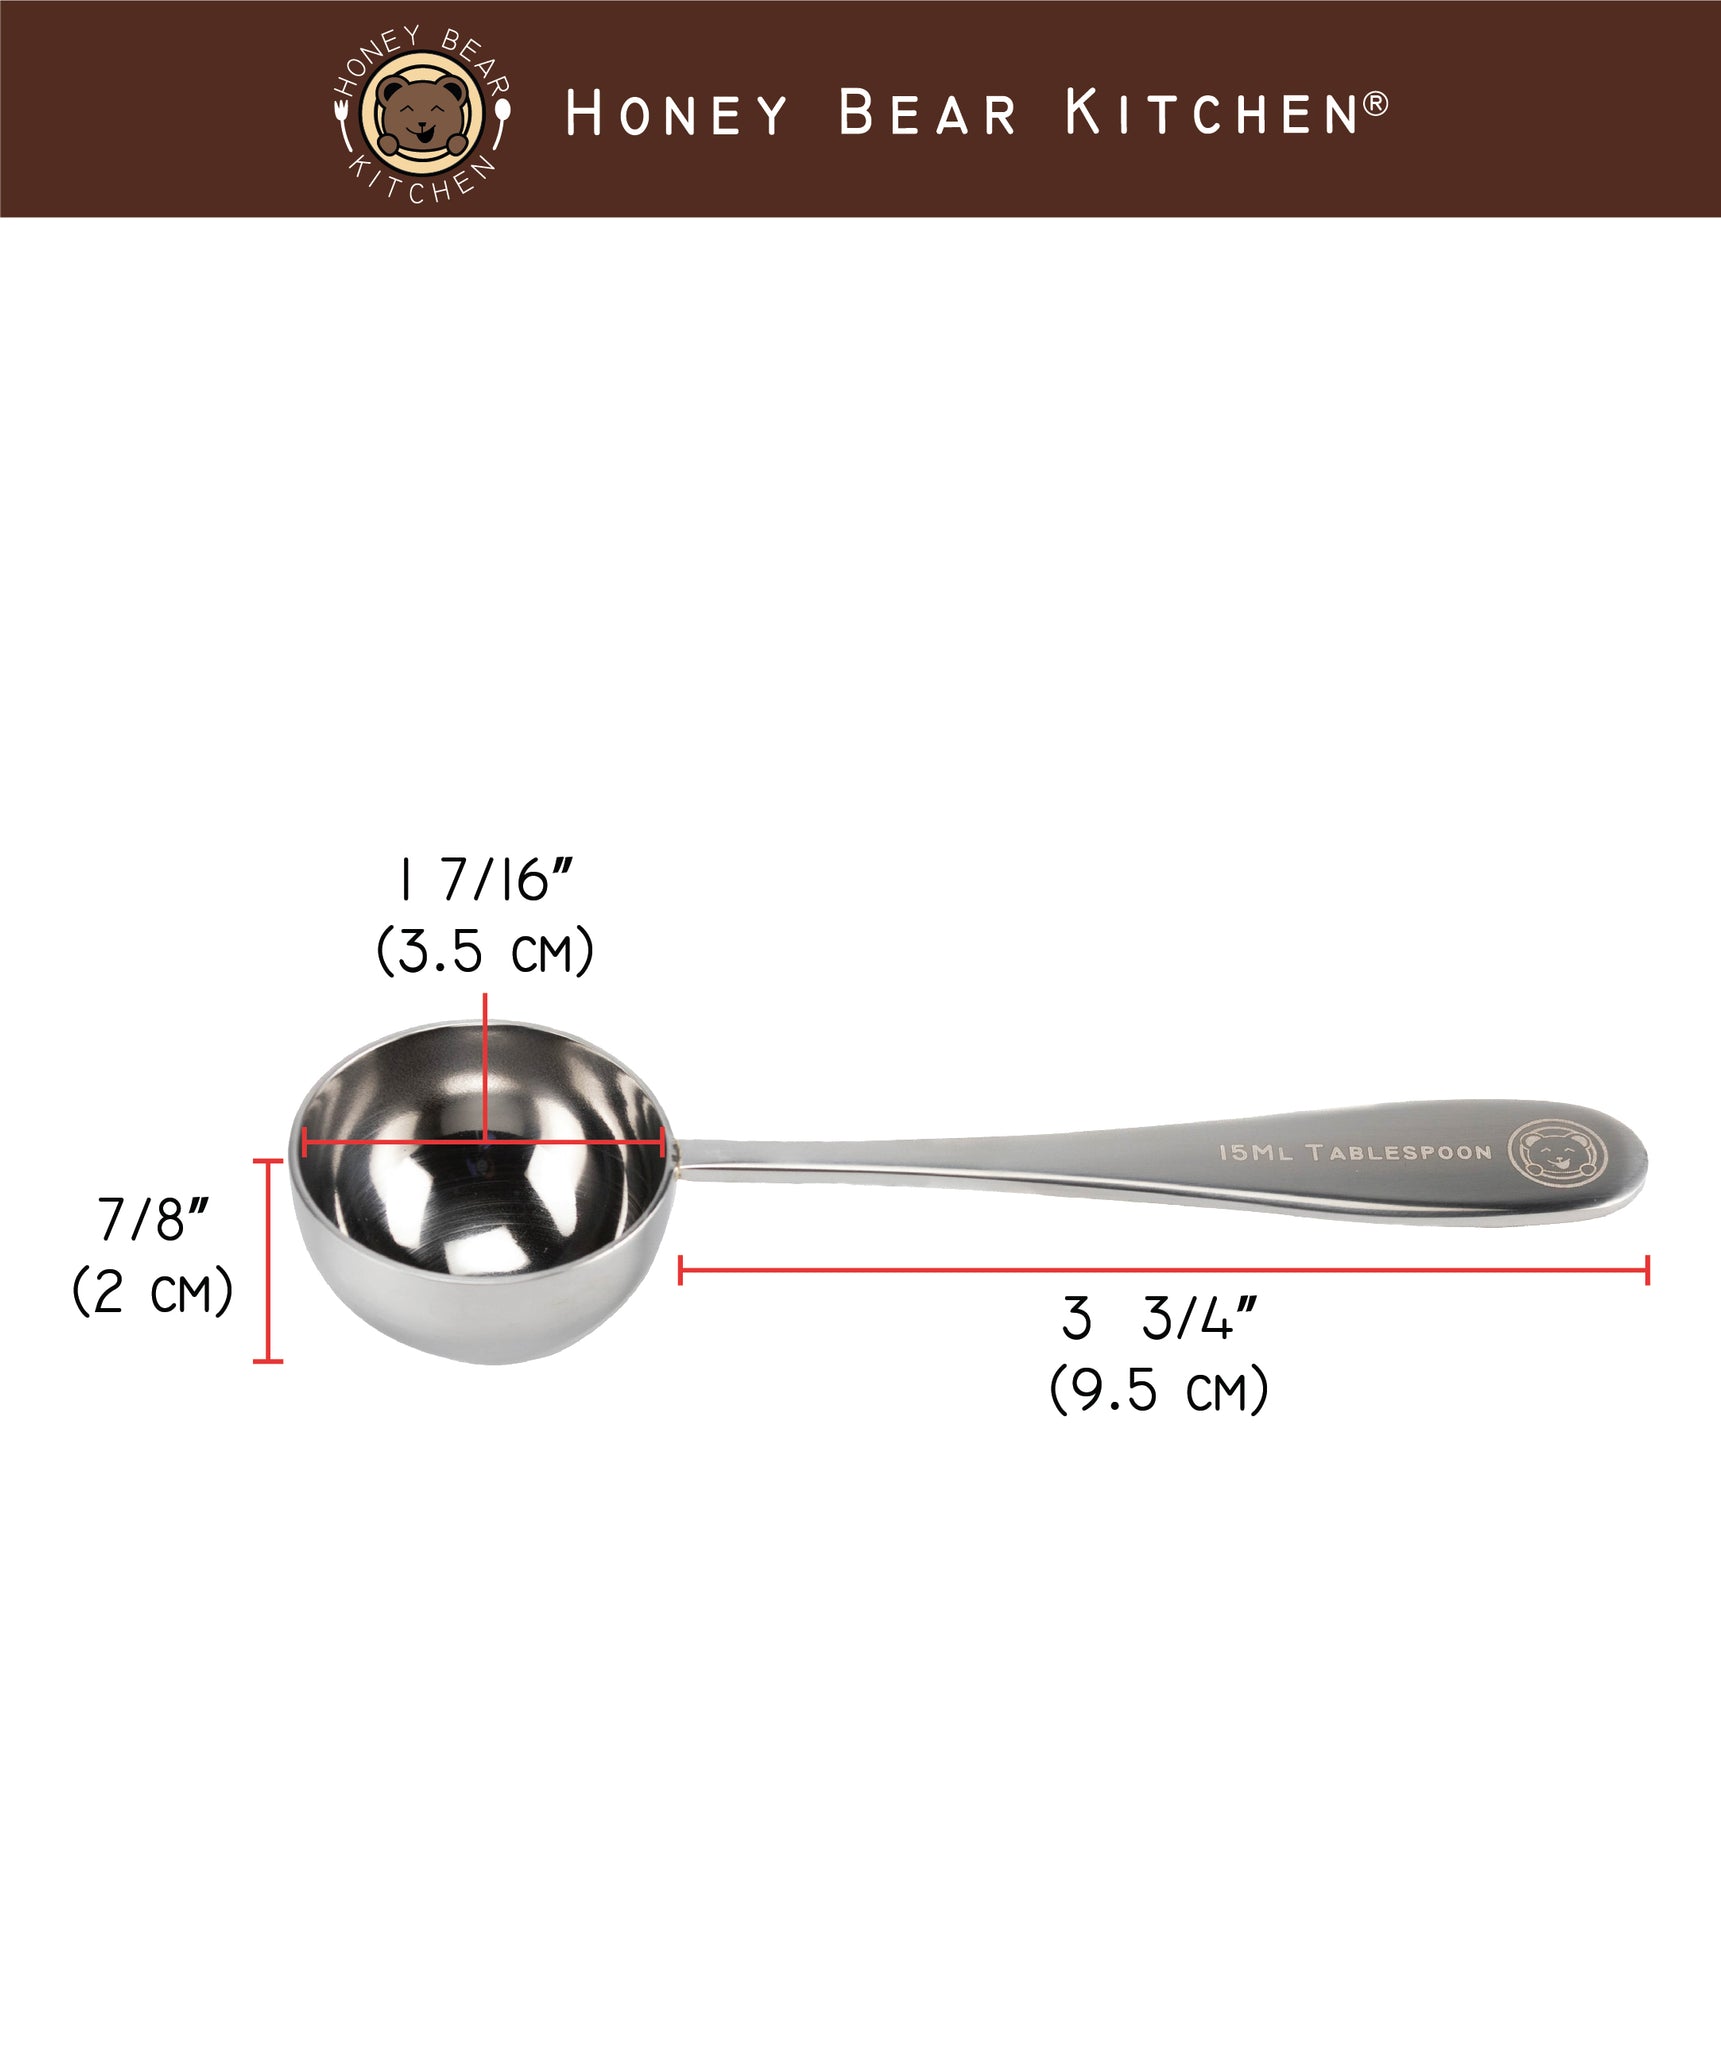 Tablespoon 15 ml Set of 2: Polished Stainless Steel – Honey Bear Kitchen